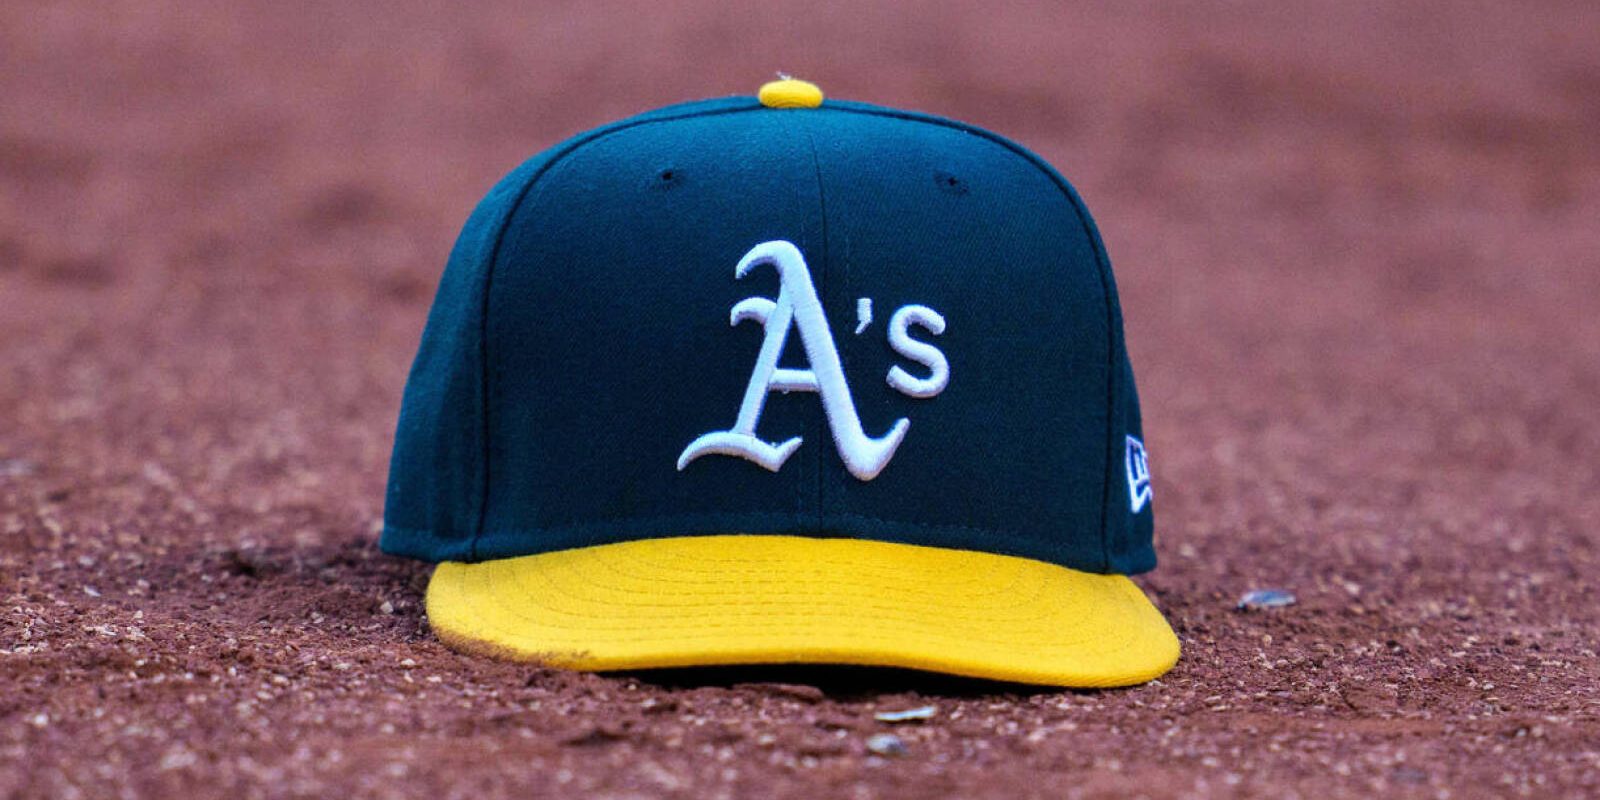 May 26, 2022; Oakland, California, USA; Oakland Athletics baseball hat on the field of play during the third inning after the called third strike of Oakland Athletics designated hitter Jed Lowrie (not pictured) at RingCentral Coliseum. Mandatory Credit: Neville E. Guard-USA TODAY Sports